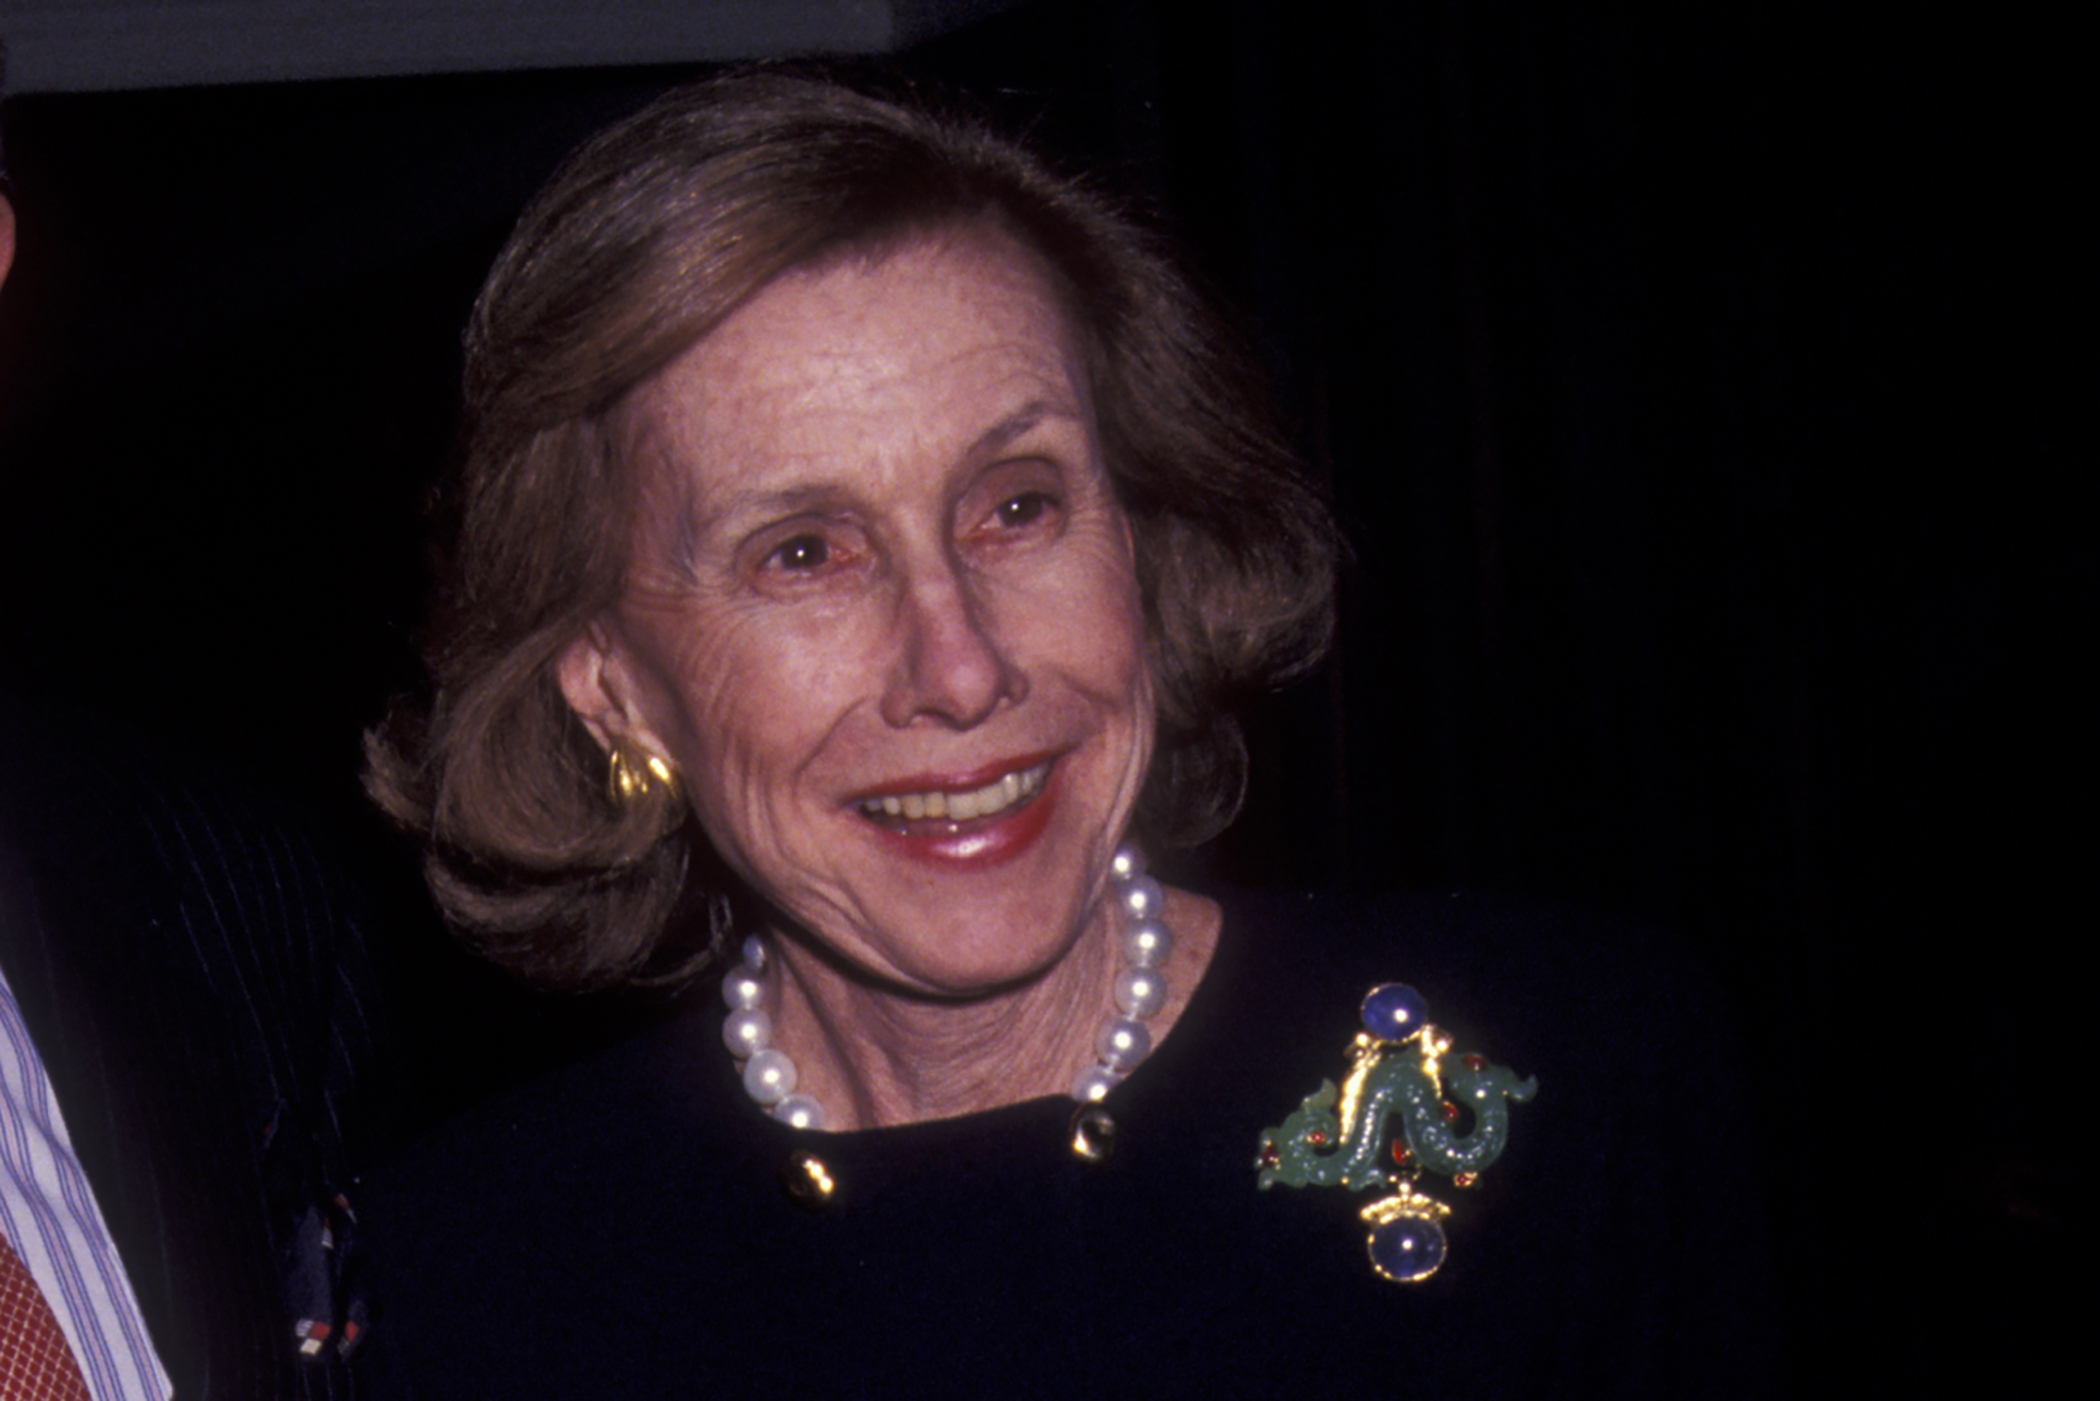 Anne Cox Chambers attends 38th Annual Winter Antiques Show on January 17, 1992 at Seventh Regiment Armory in New York City.